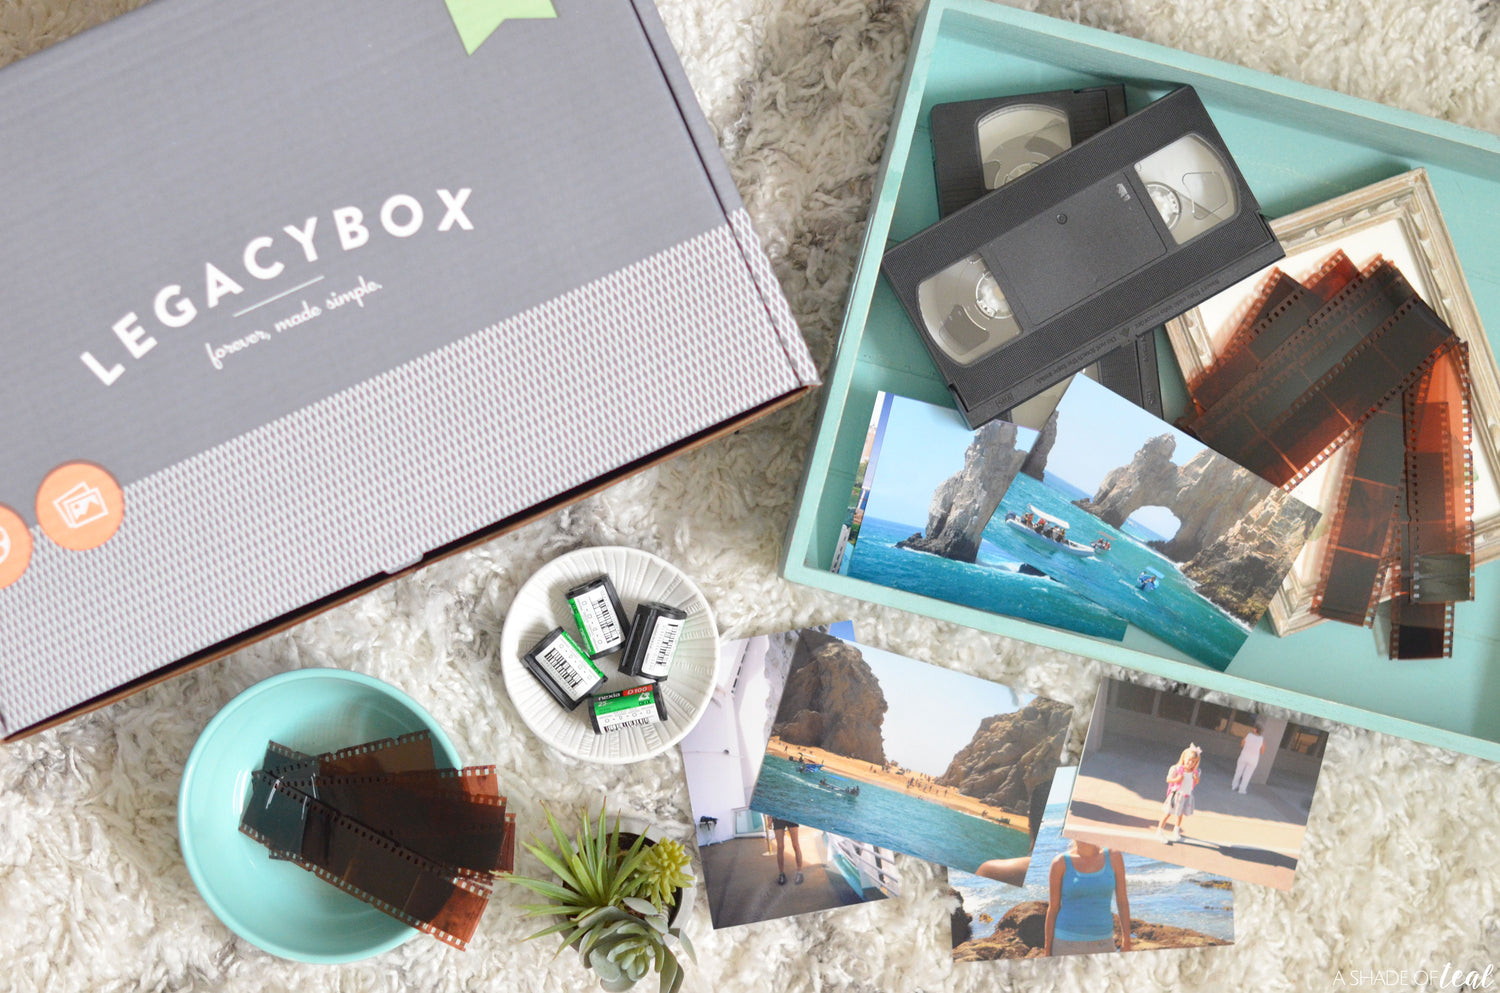 Protect your family's memories with Legacybox. It is the easiest and safest way to digitize your old media including photos, reels, tapes, and audio.